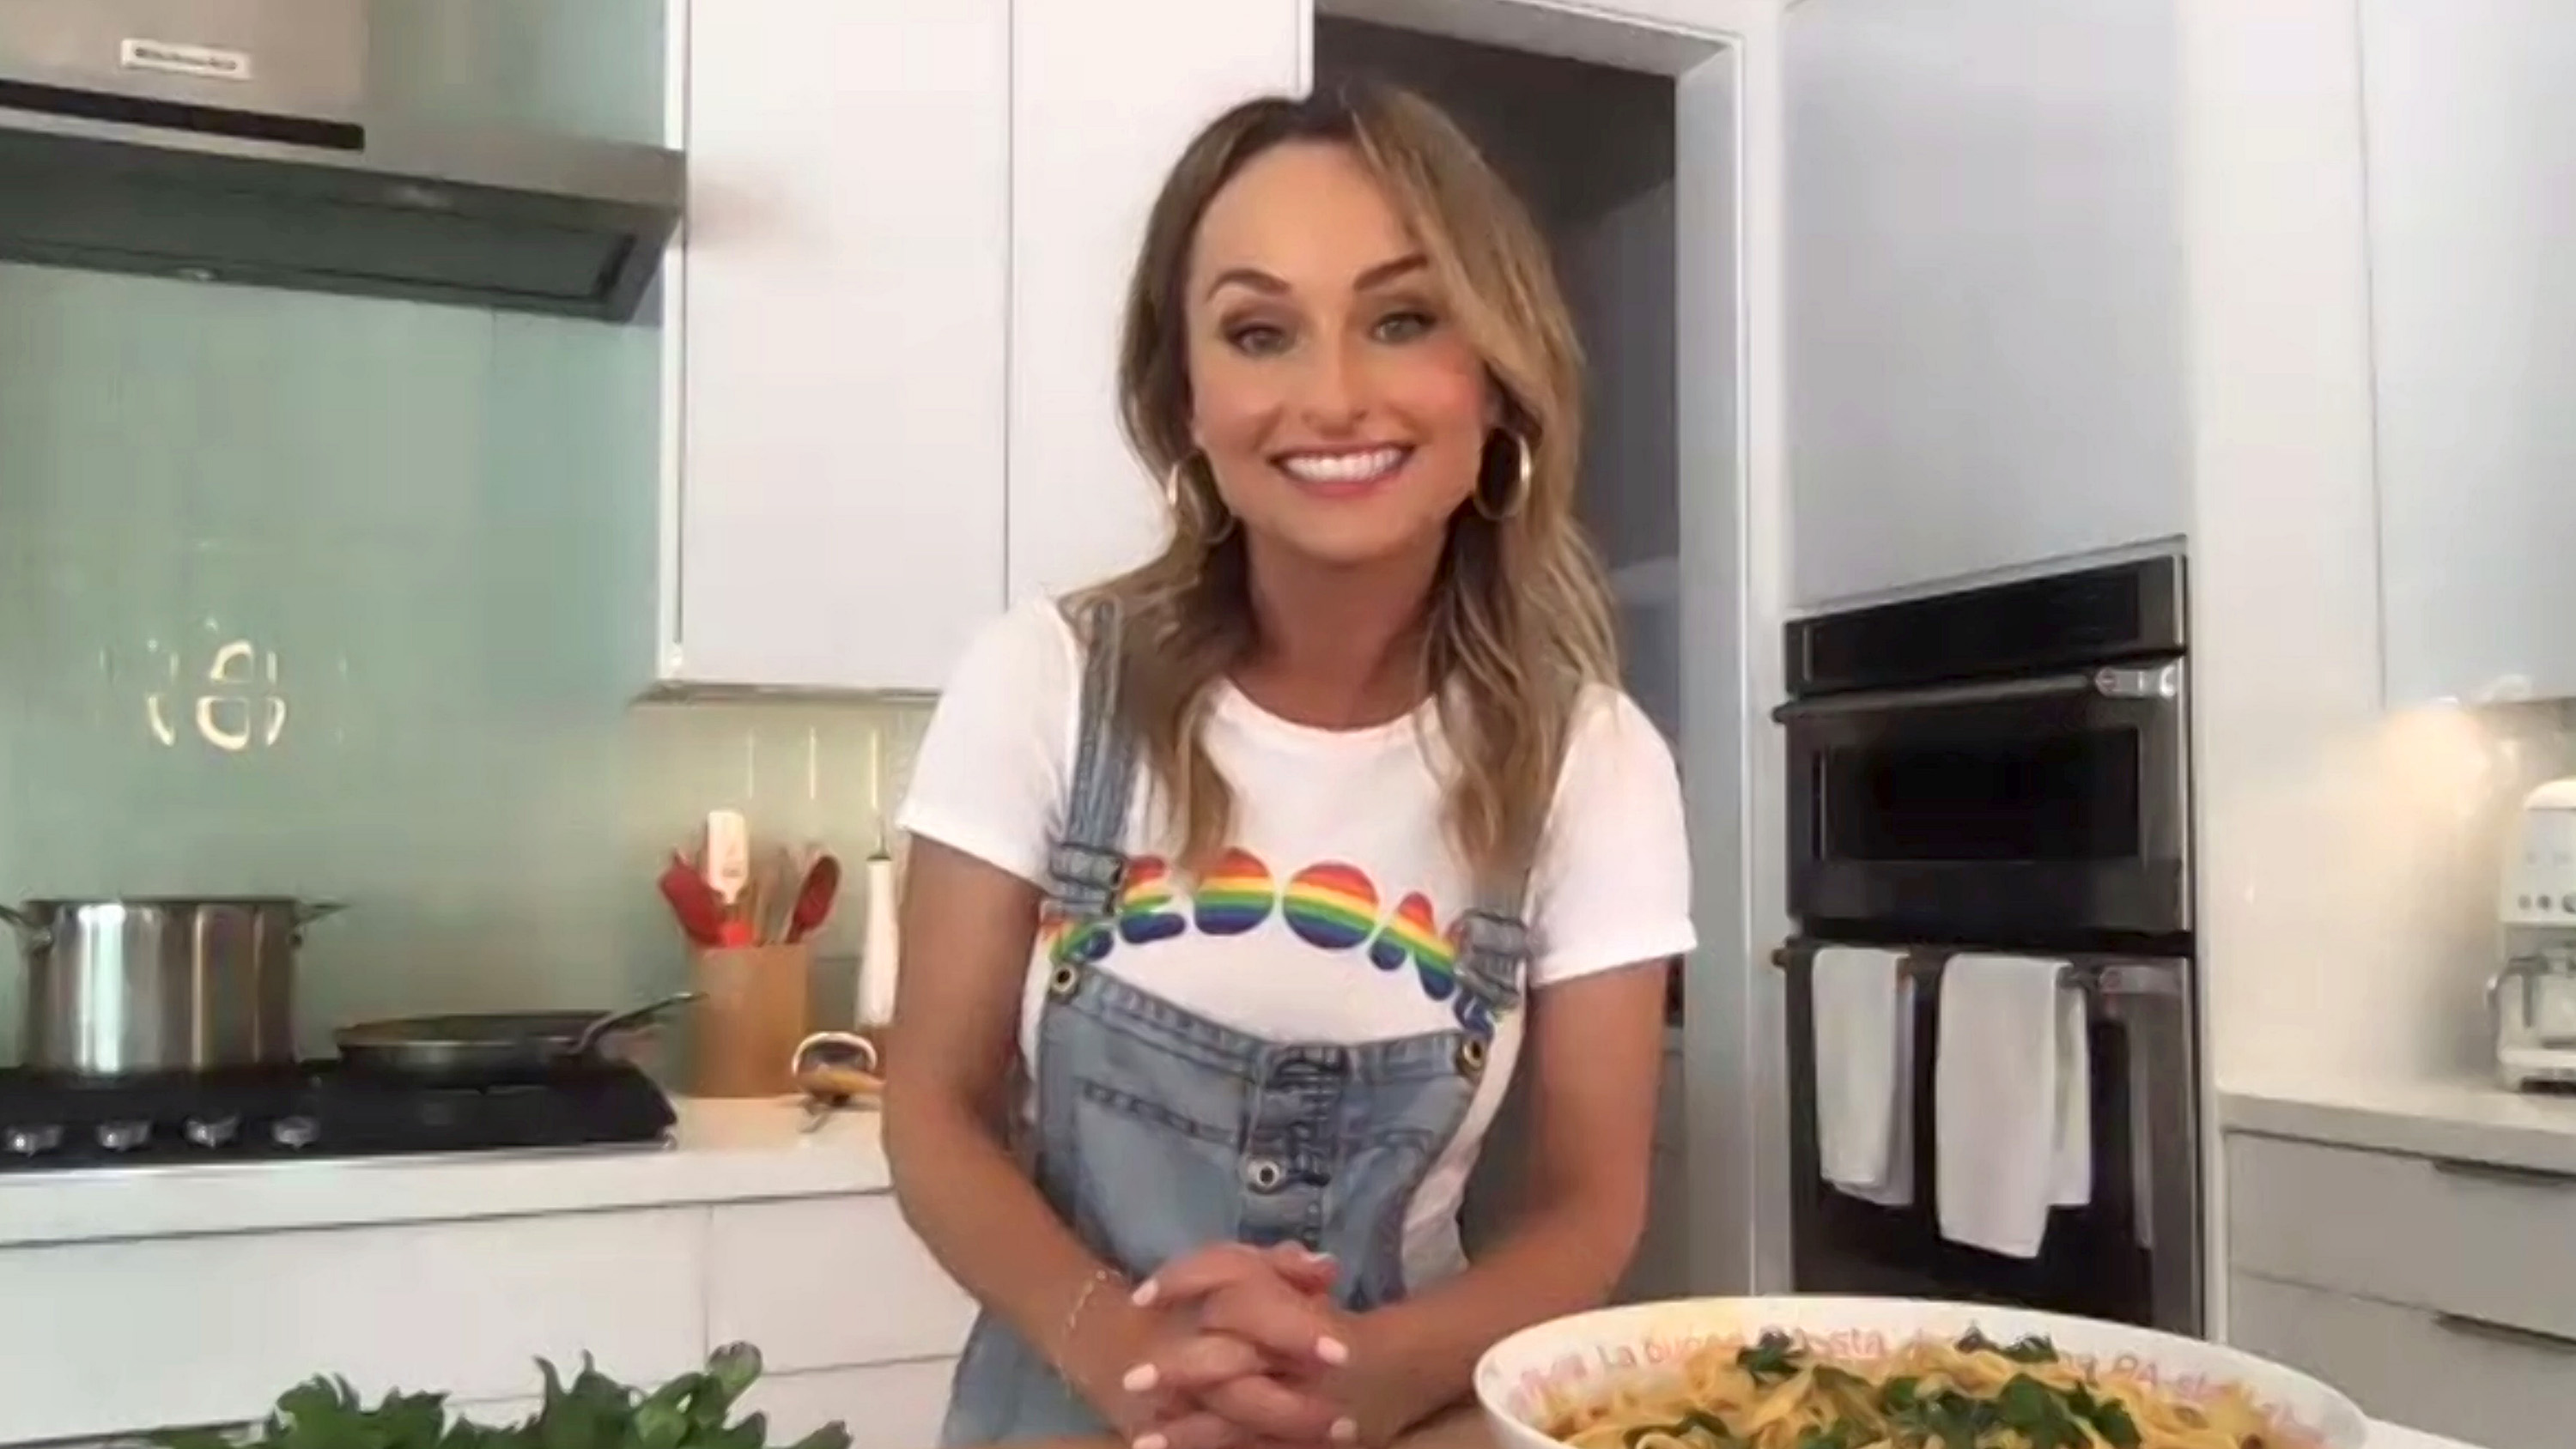 'In the Kitchen' with Giada De Laurentiis presented by Food Network & Cooking Channel as part of NYCWFF Goes Virtual presented by Capital One